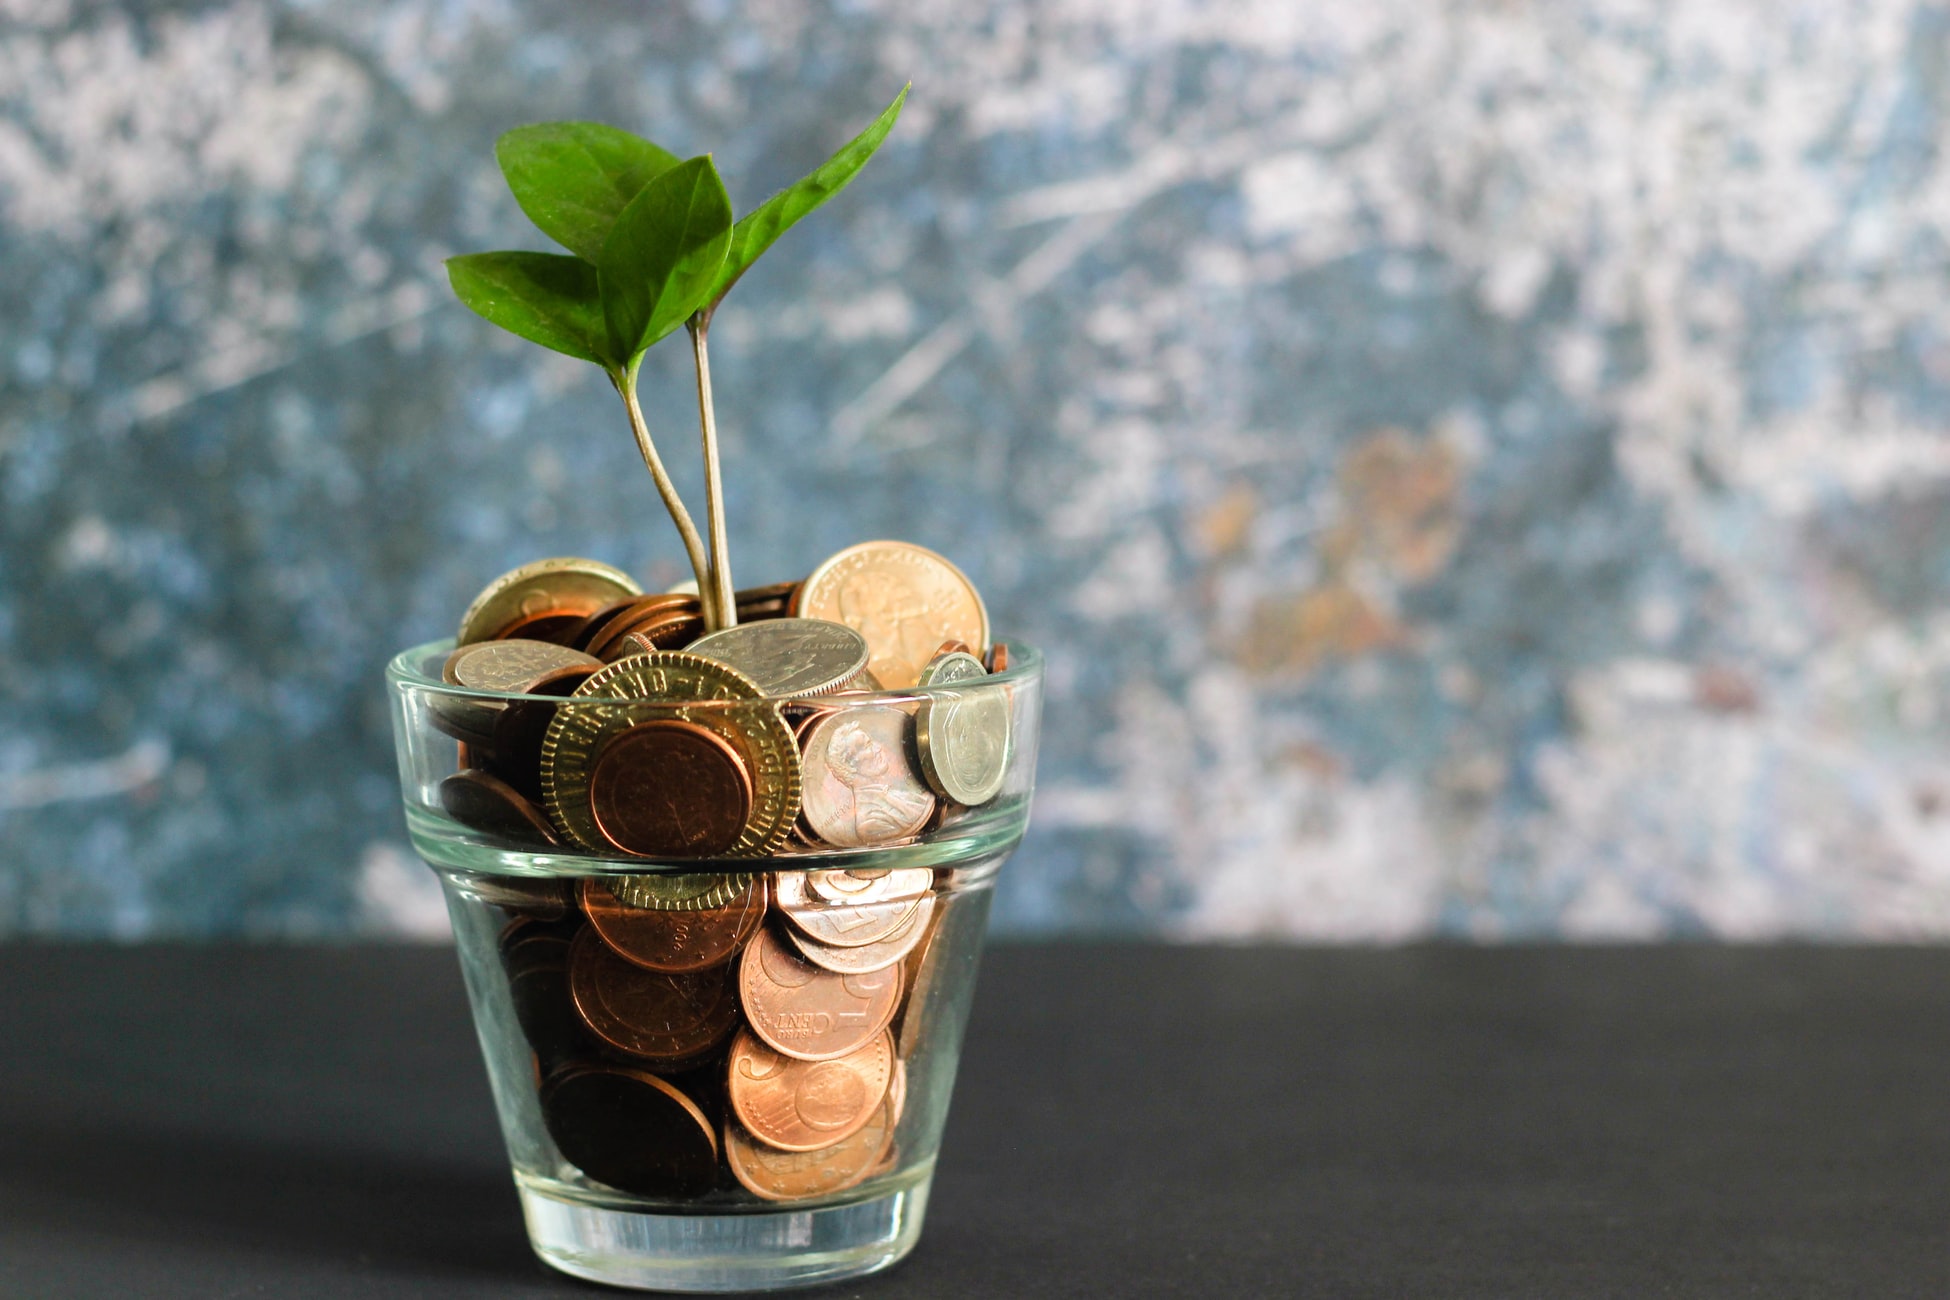 A seedling growing out of a glass full of coins